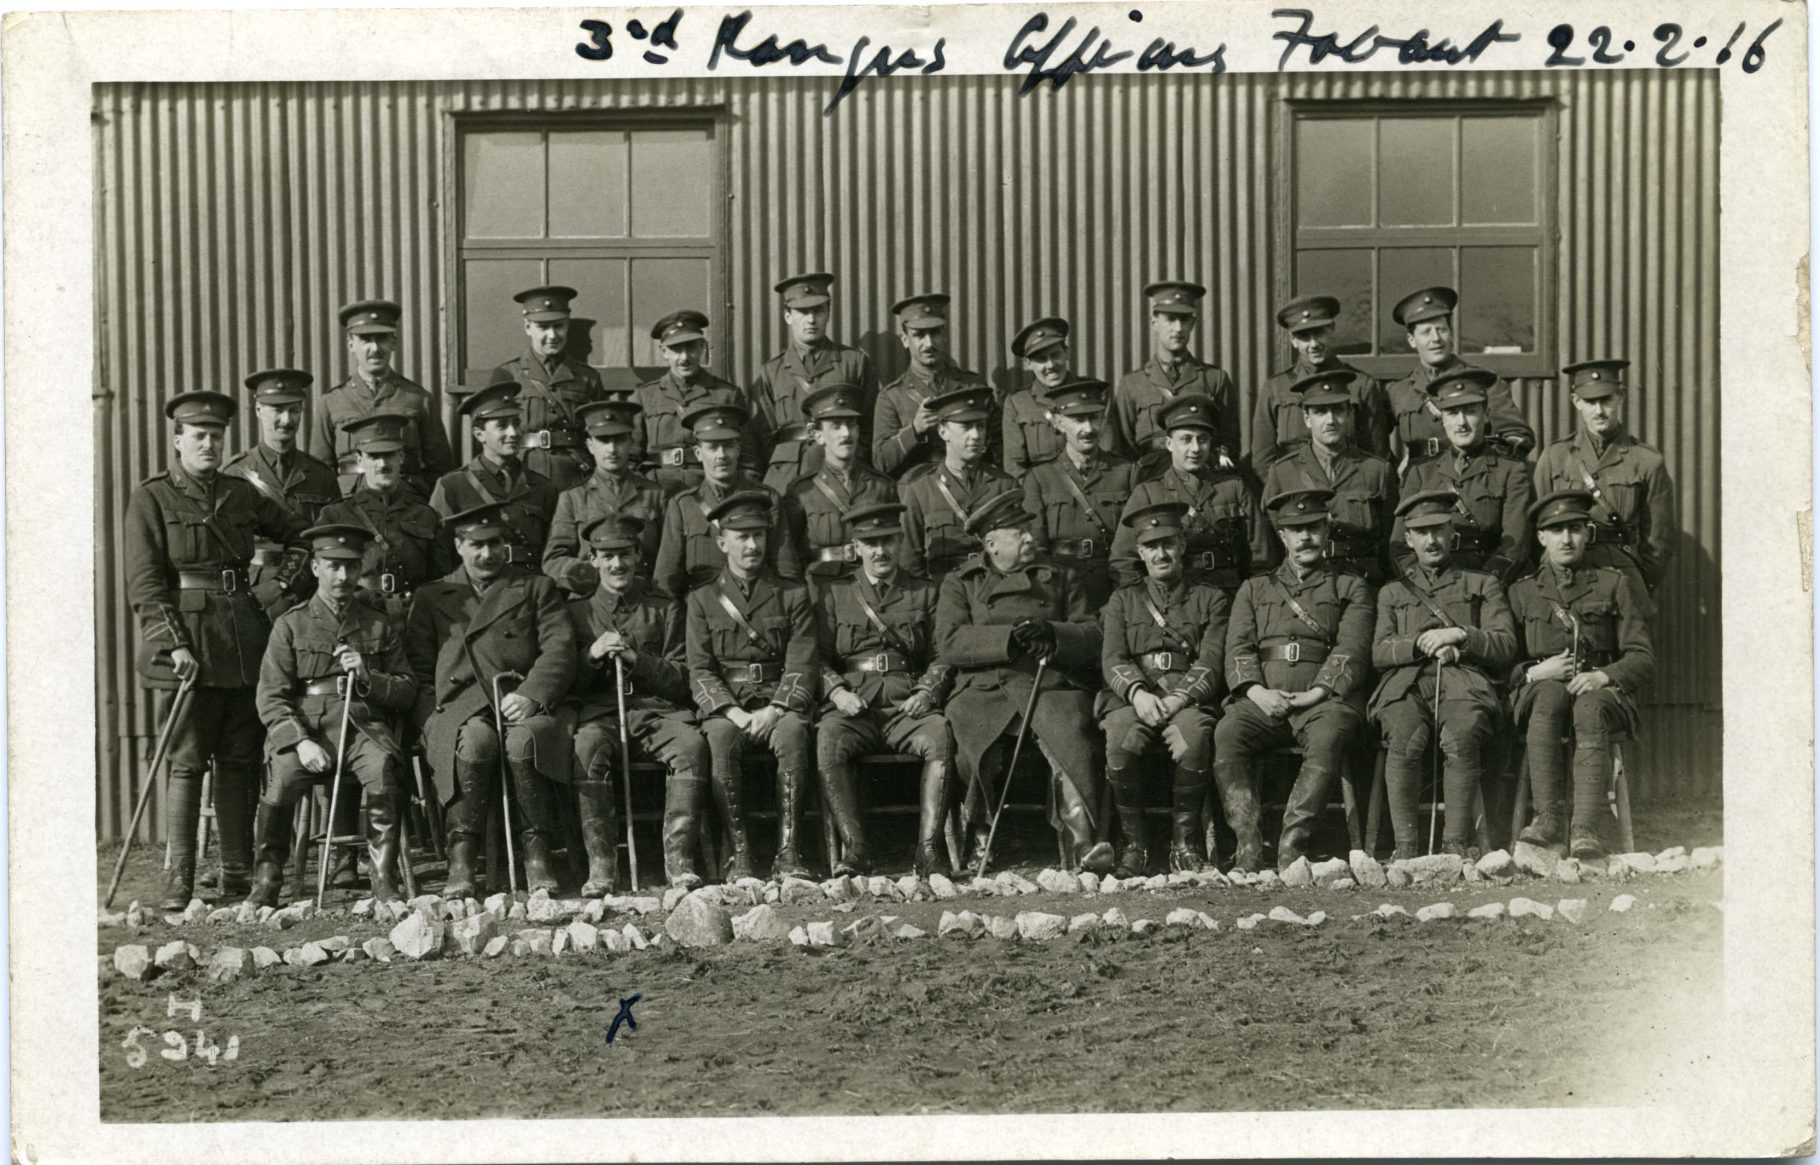 3rd Rangers Officers, February 1916